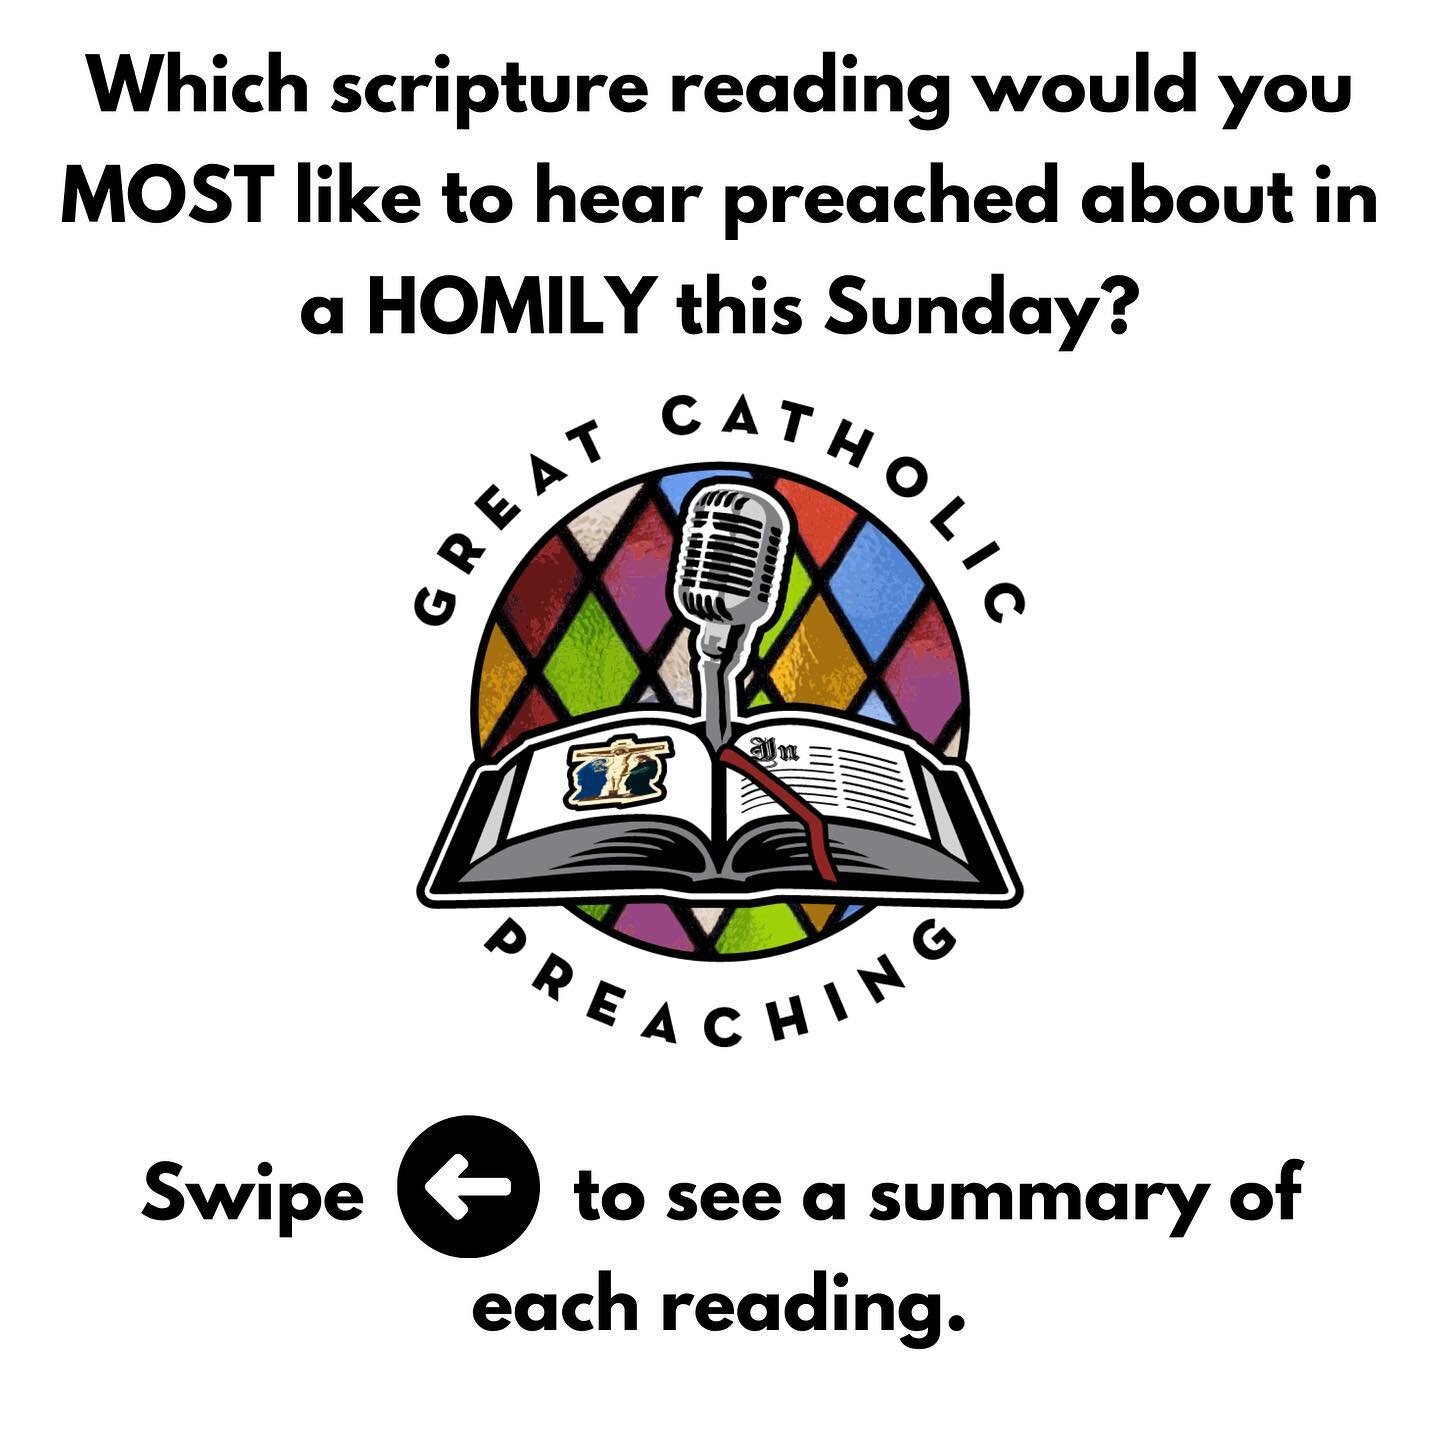 Which scripture reading would you MOST like to hear preached about in a HOMILY this Sunday?⁠⠀
⁠⠀
Swipe ⬅️ to see a summary of each reading.⁠⠀
⁠⠀
⁠⠀
⁠⠀
#bissisterhood #projectblessed #philotheafound #catholiccreative #catholicconnect #catholic #cathol